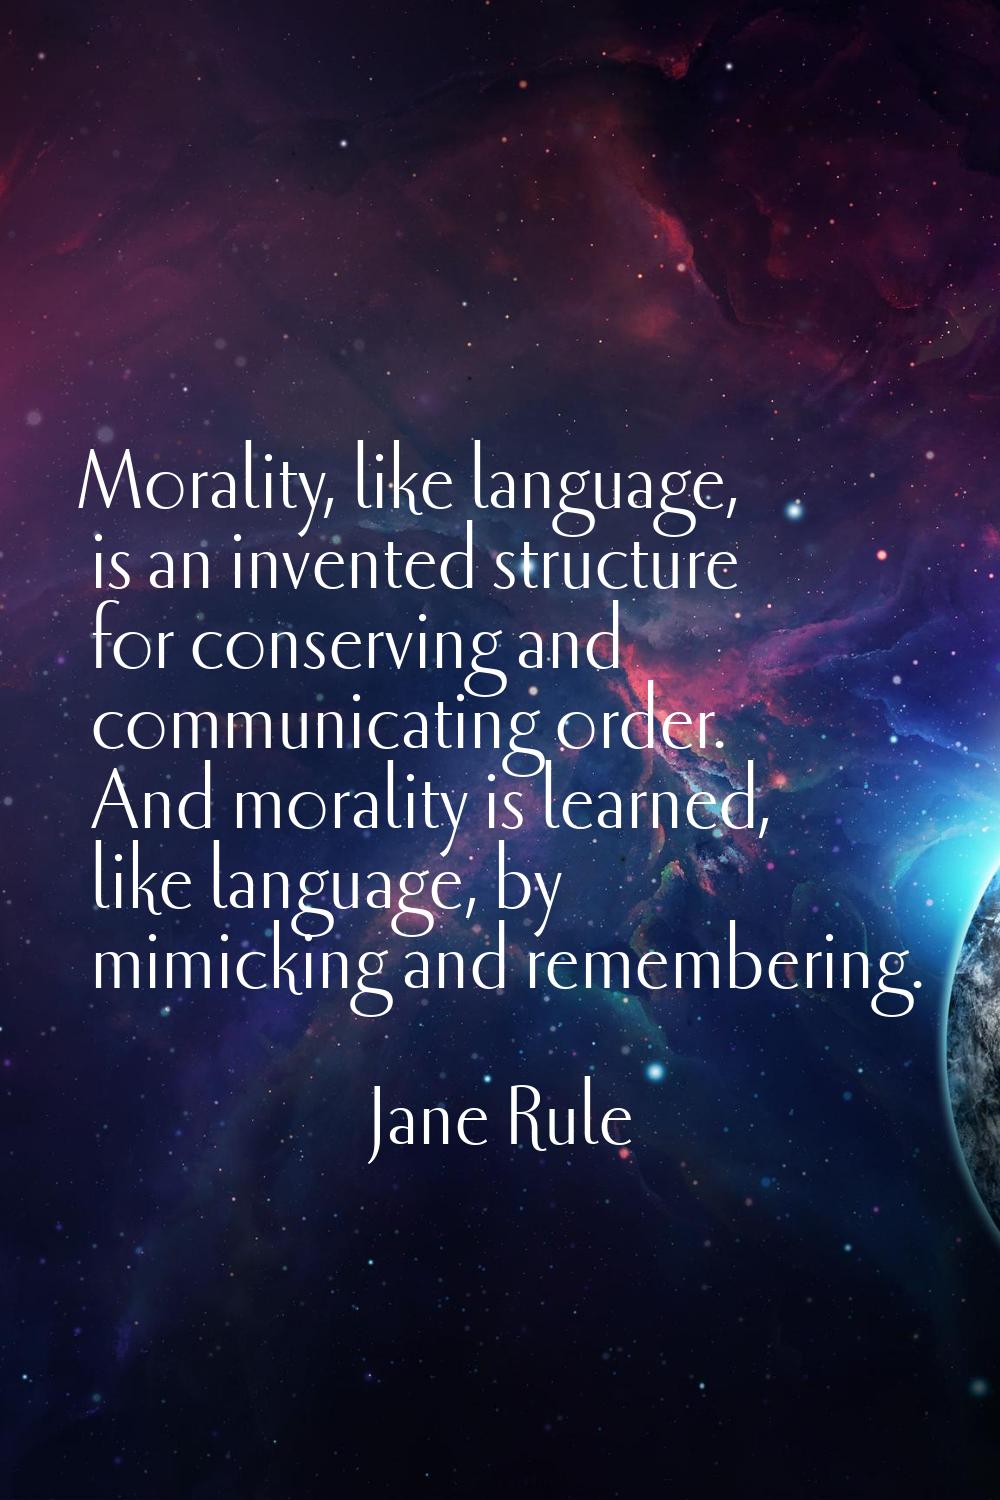 Morality, like language, is an invented structure for conserving and communicating order. And moral